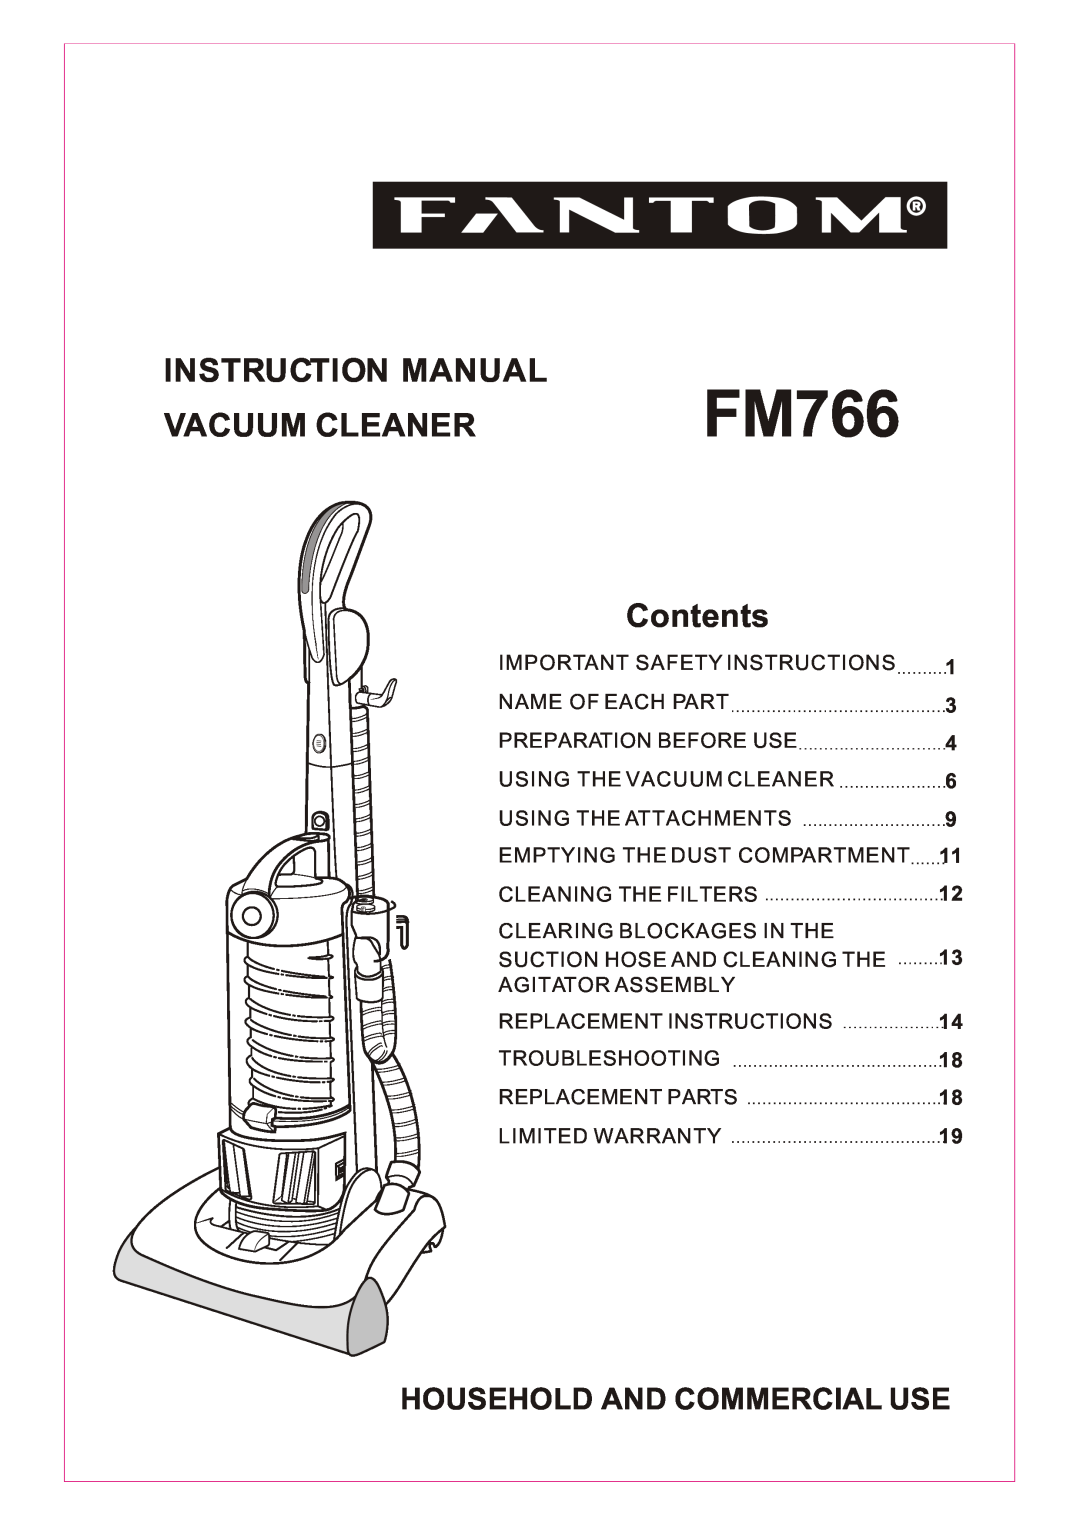 Fantom Vacuum FM766 instruction manual Vacuum Cleaner, Contents, Household And Commercial Use, 1 3 4 6 9 11 12 13 14 18 